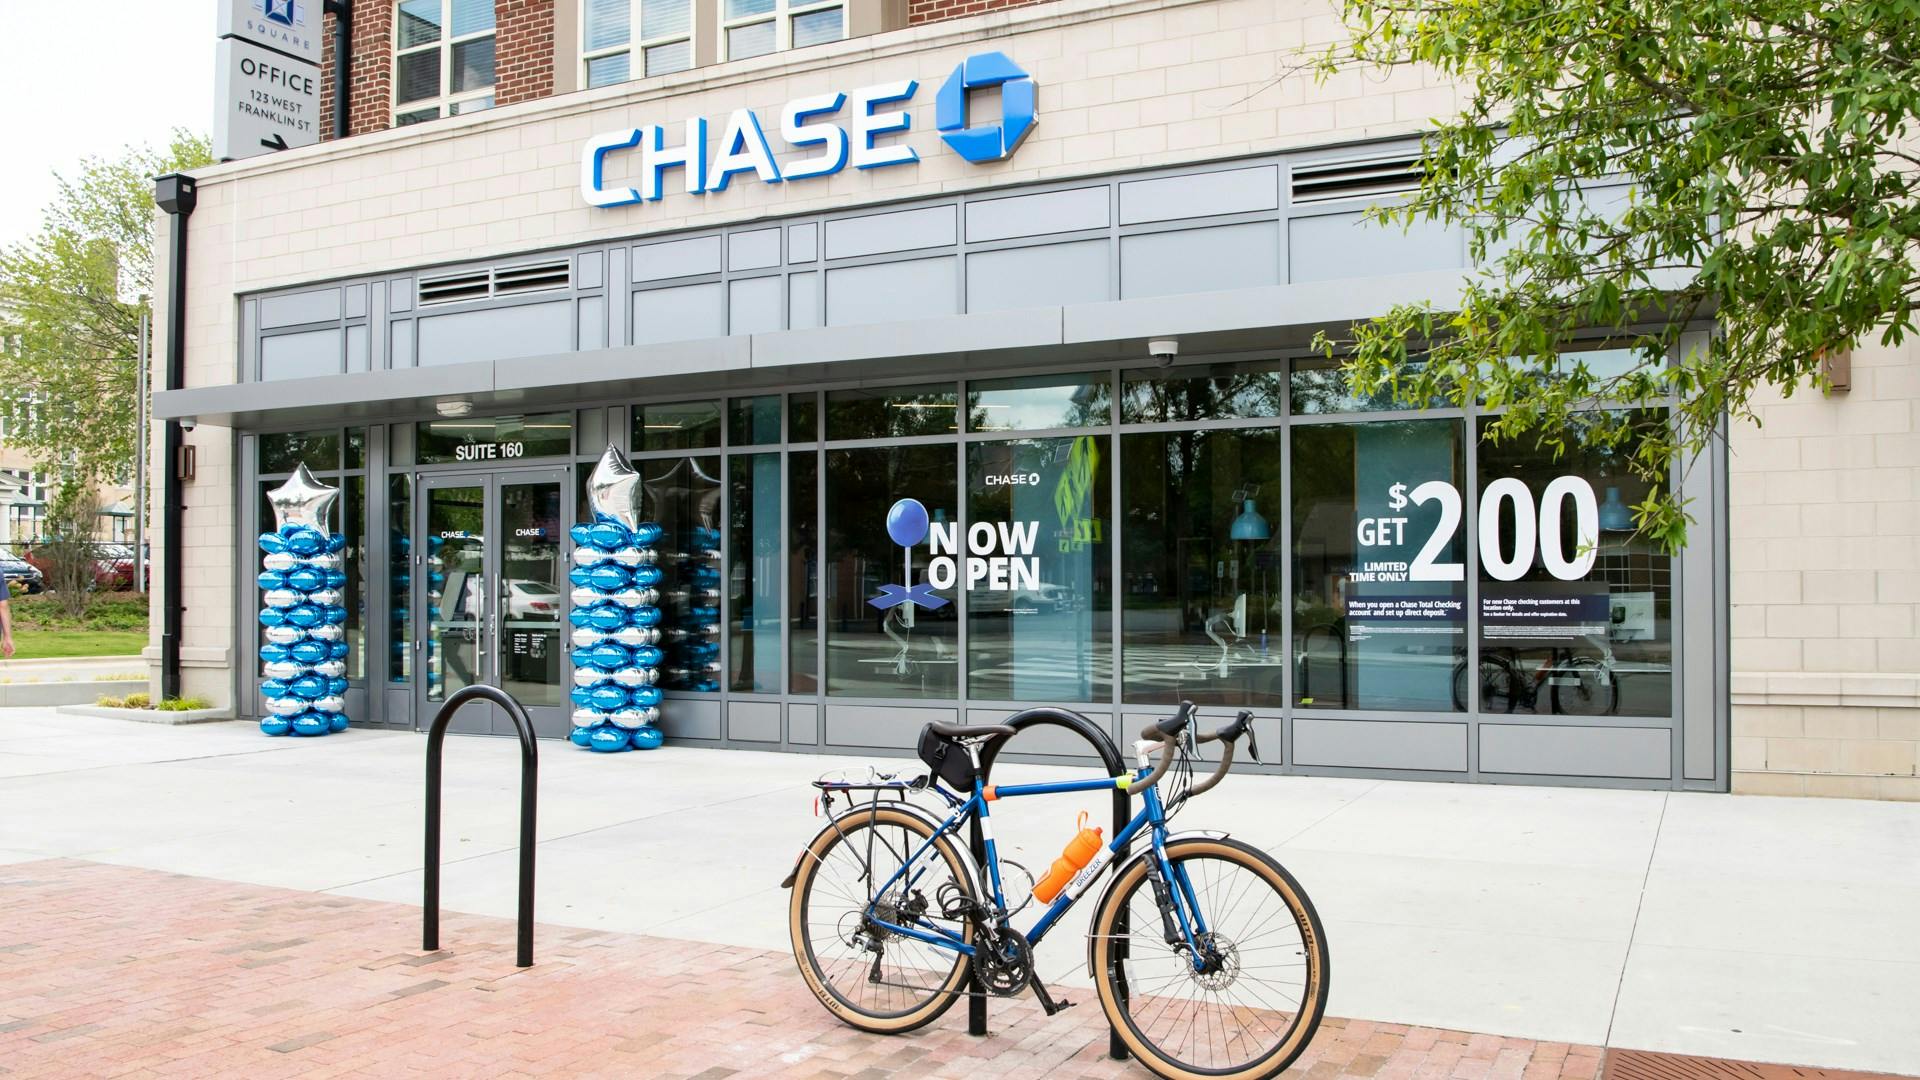 The exterior of a Chase bank location with a bike parked out front.